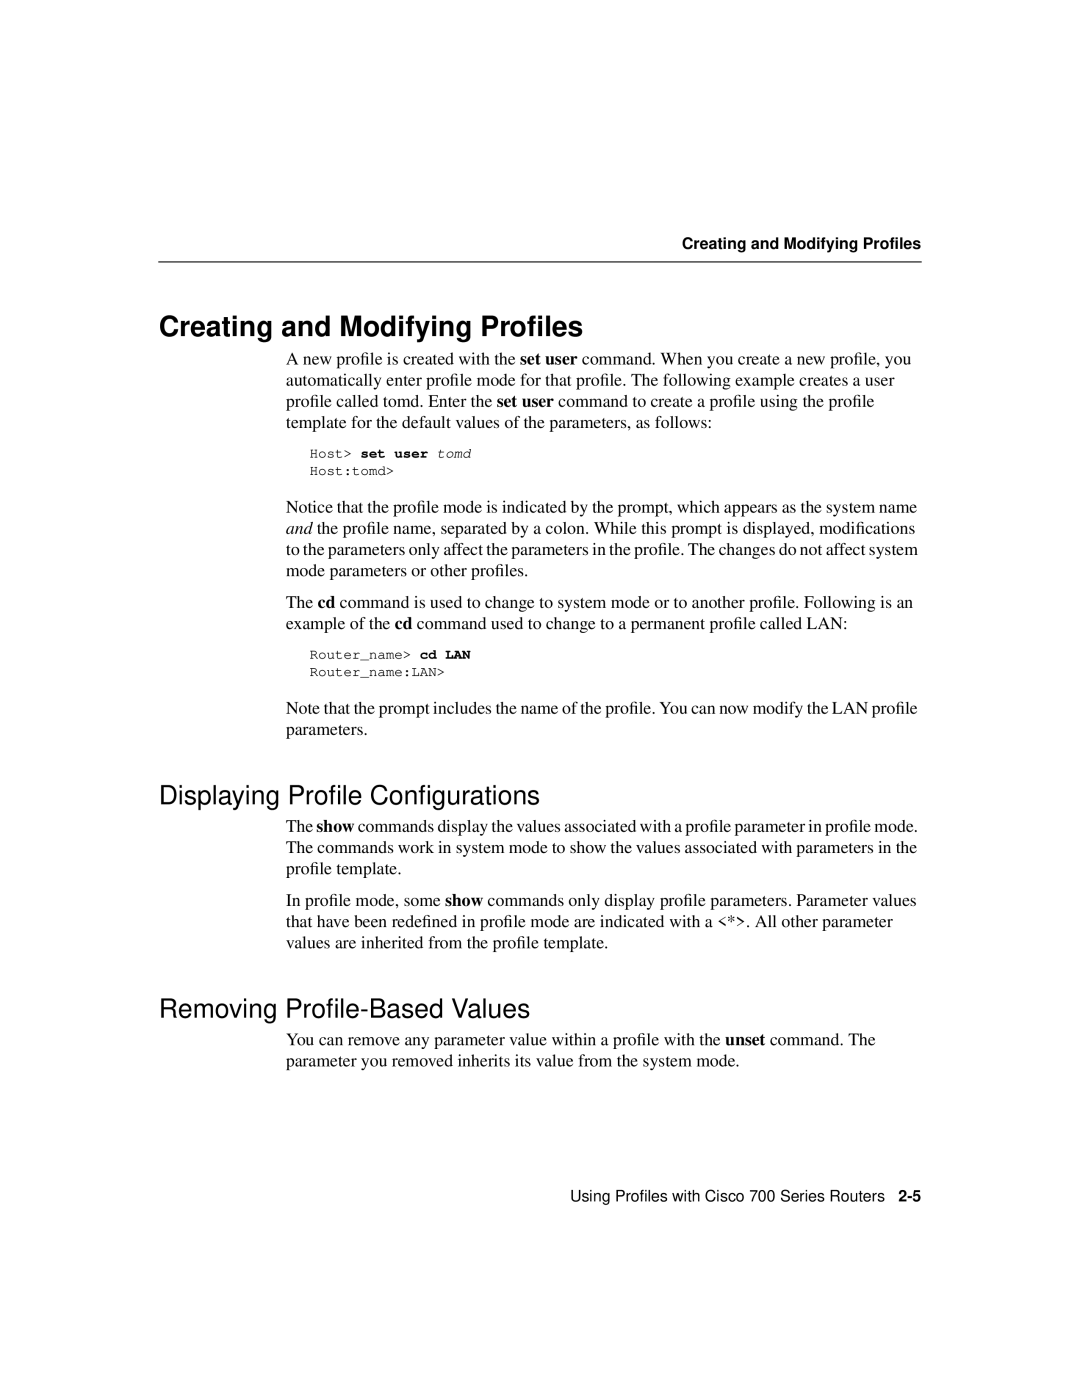 Cisco Systems 700 manual Creating and Modifying Proﬁles, Displaying Proﬁle Conﬁgurations, Removing Proﬁle-Based Values 